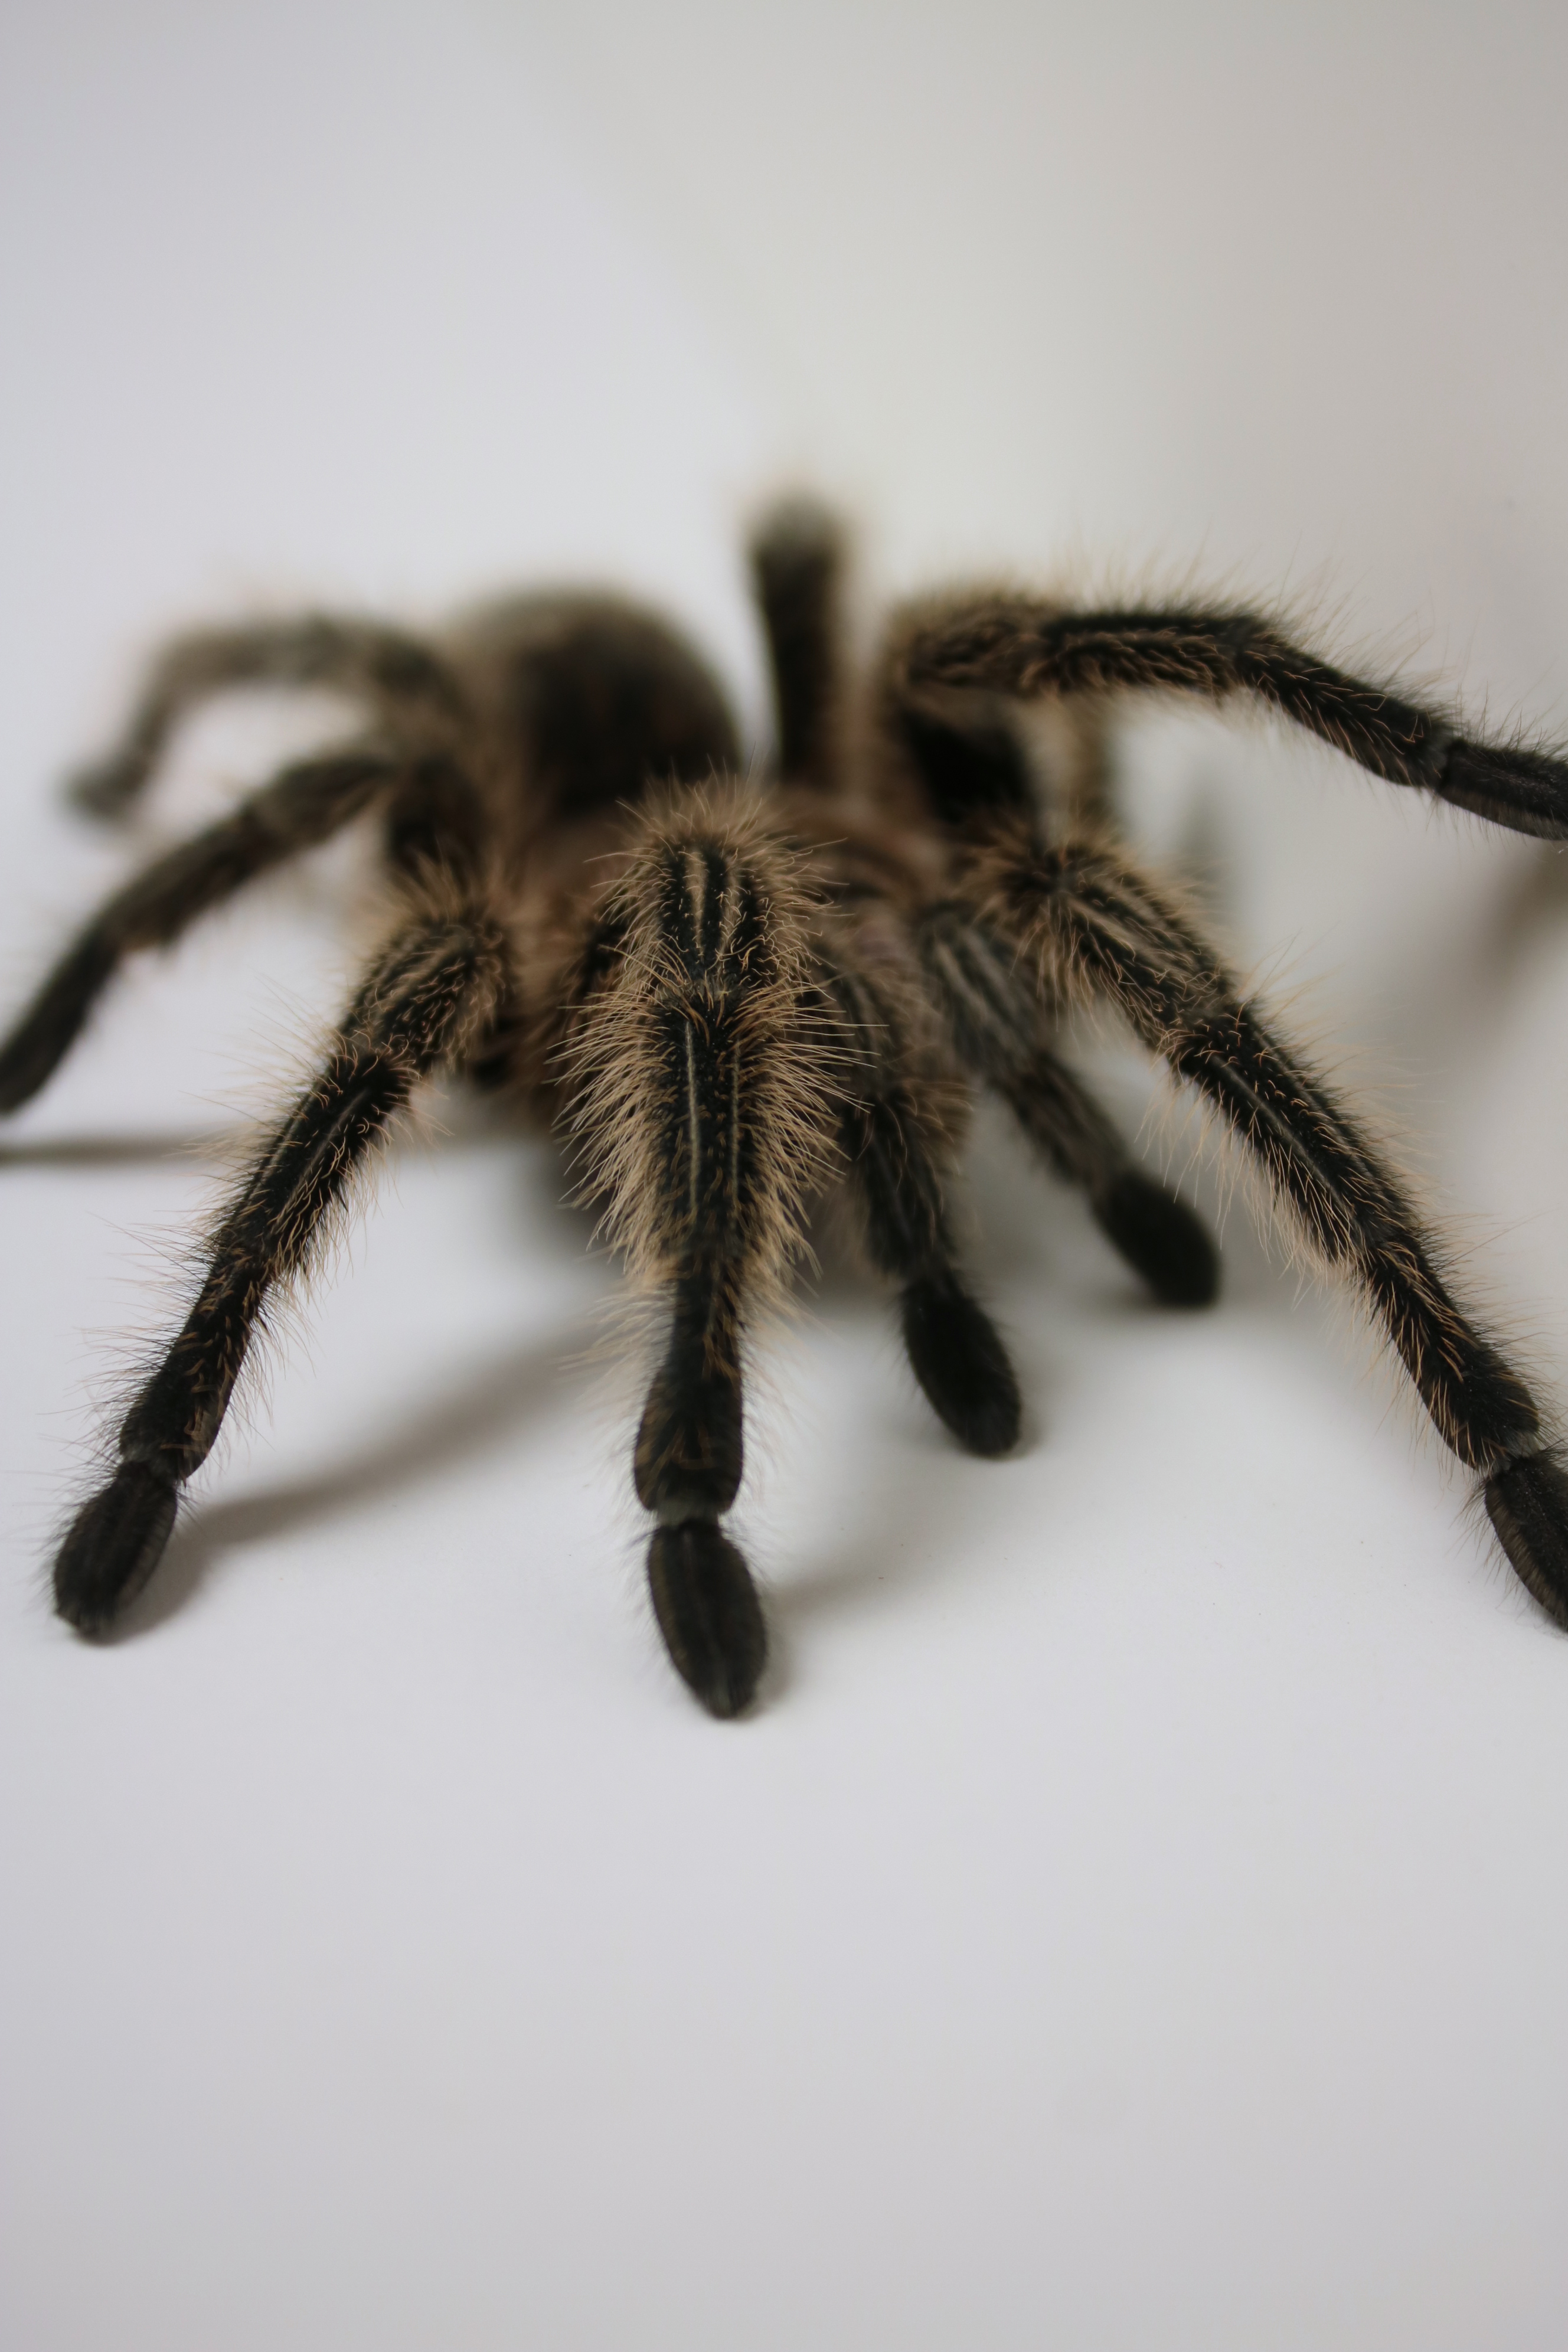 Venom and barbed hairs: Why tarantulas are actually quite cool ...